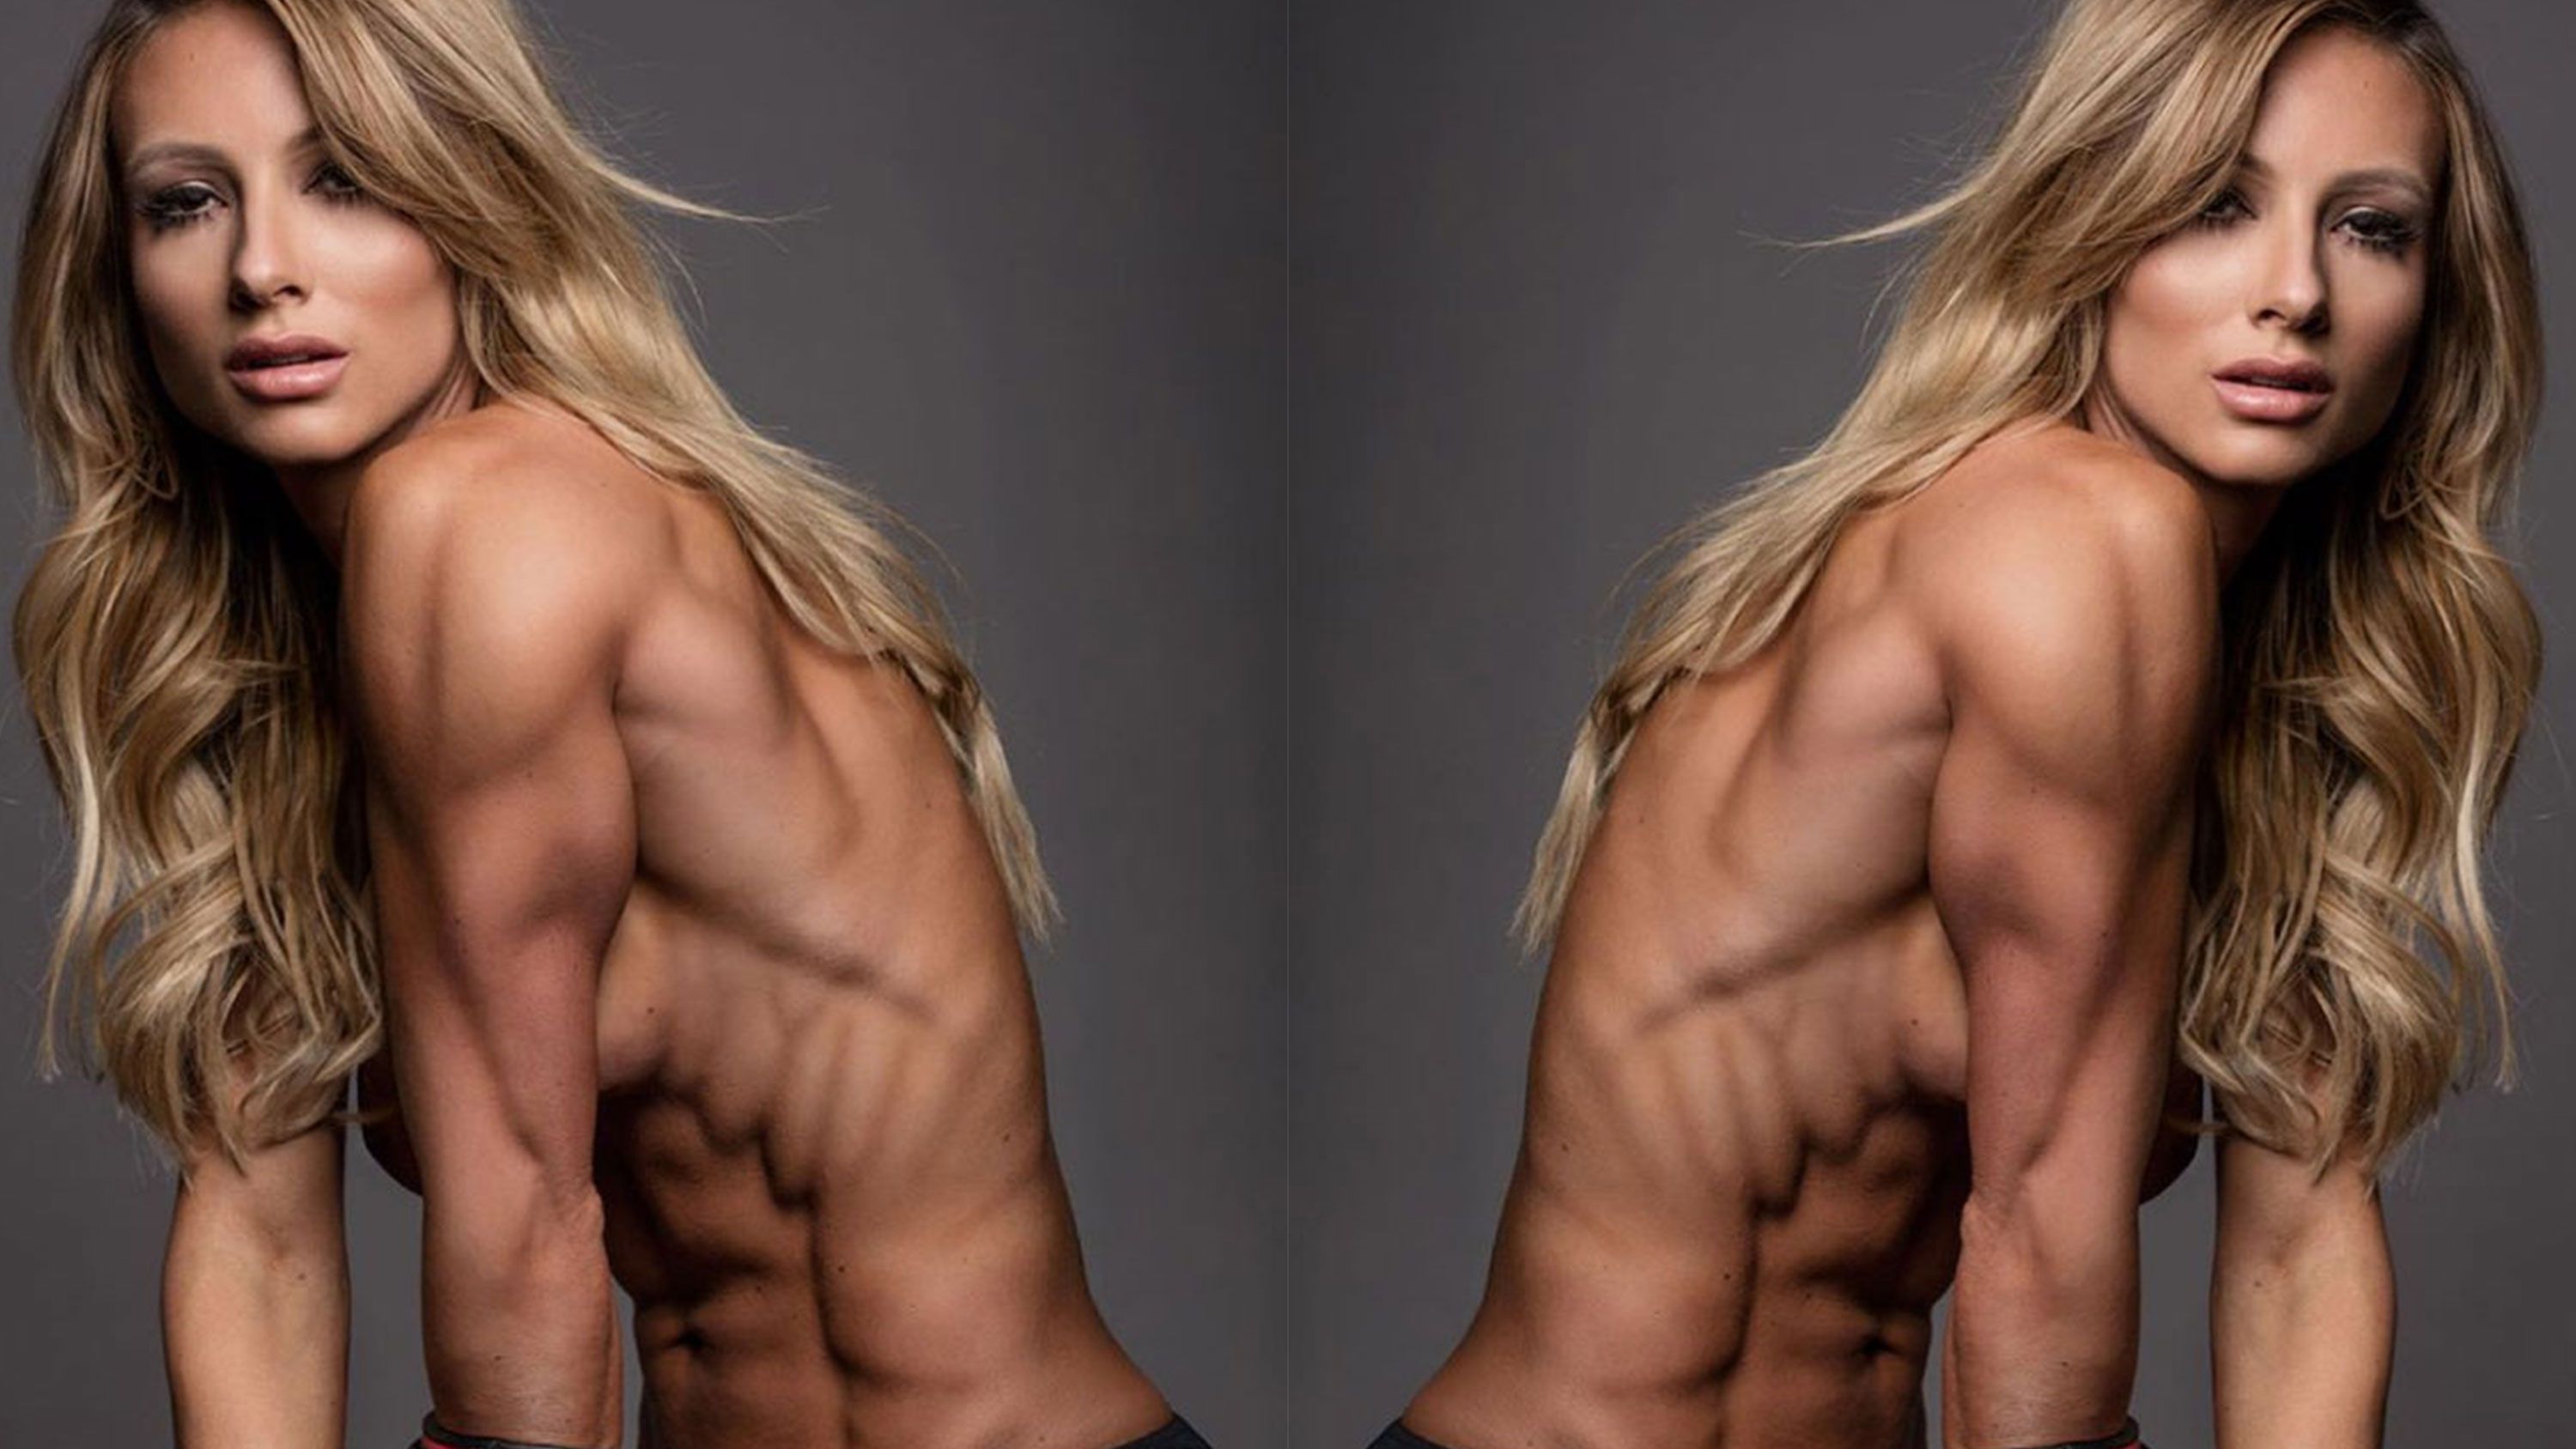 adela pina recommends paige hathaway topless pic